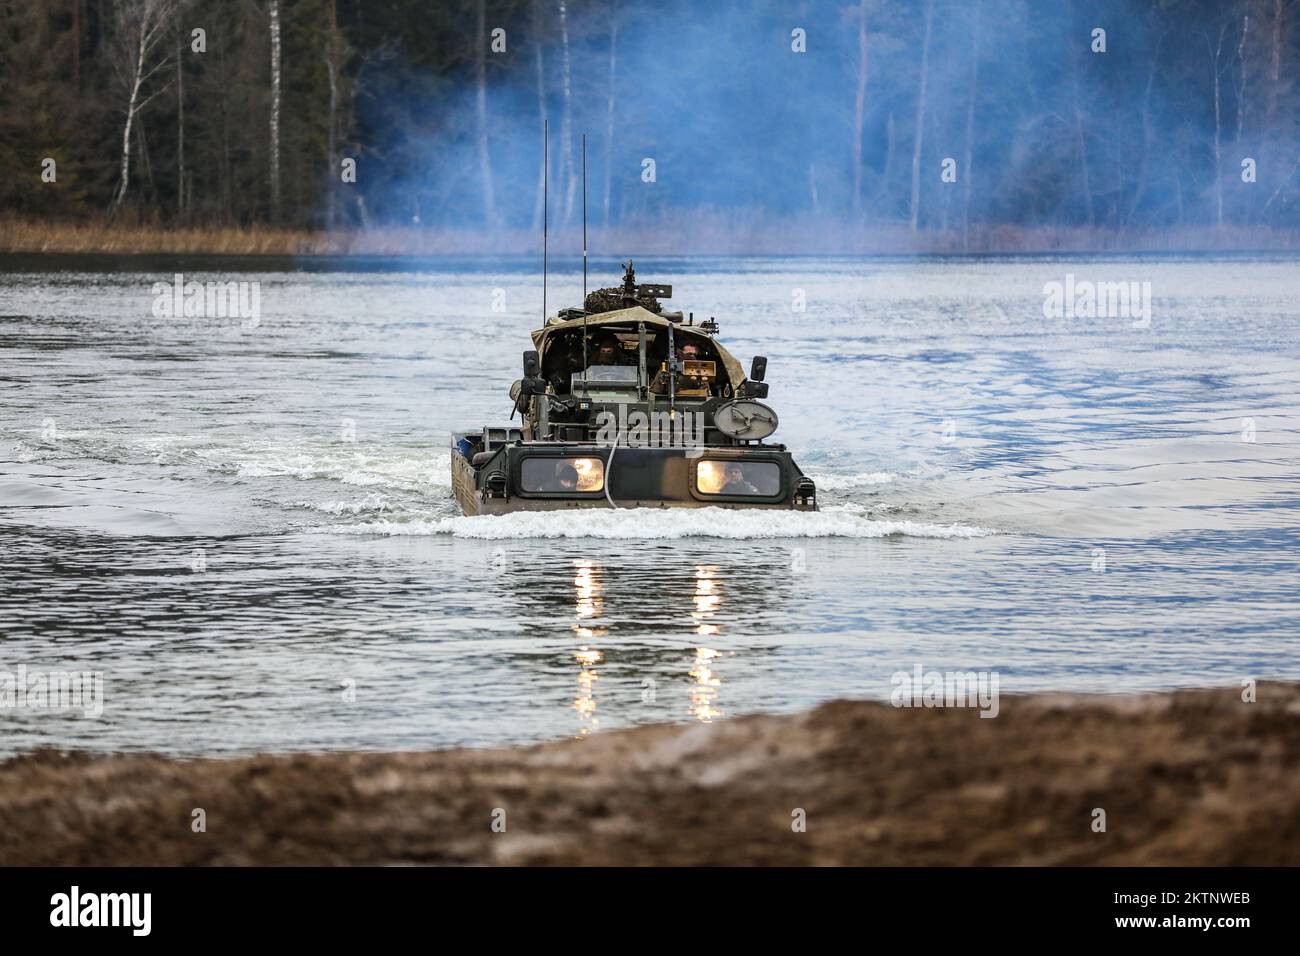 Polish soldiers assigned to the 20th Mechanized Brigade utilize an Army Medium Amphibious Transport to carry a U.K. Royal Lancers, Prince of Wales Troop 2A Mobility Weapon-Mounted Installation Kit vehicle across a lake while conducting amphibious assault operations during the Bull Run training exercise at Bemowo Piskie, Poland, Nov. 24, 2022. The 20th Mechanized Brigade is proudly working alongside the 1st Infantry Division, NATO allies and regional security partners to provide combat-credible forces to V Corps, under America's forward deployed corps in Europe. (U.S. Army National Guard photo Stock Photo